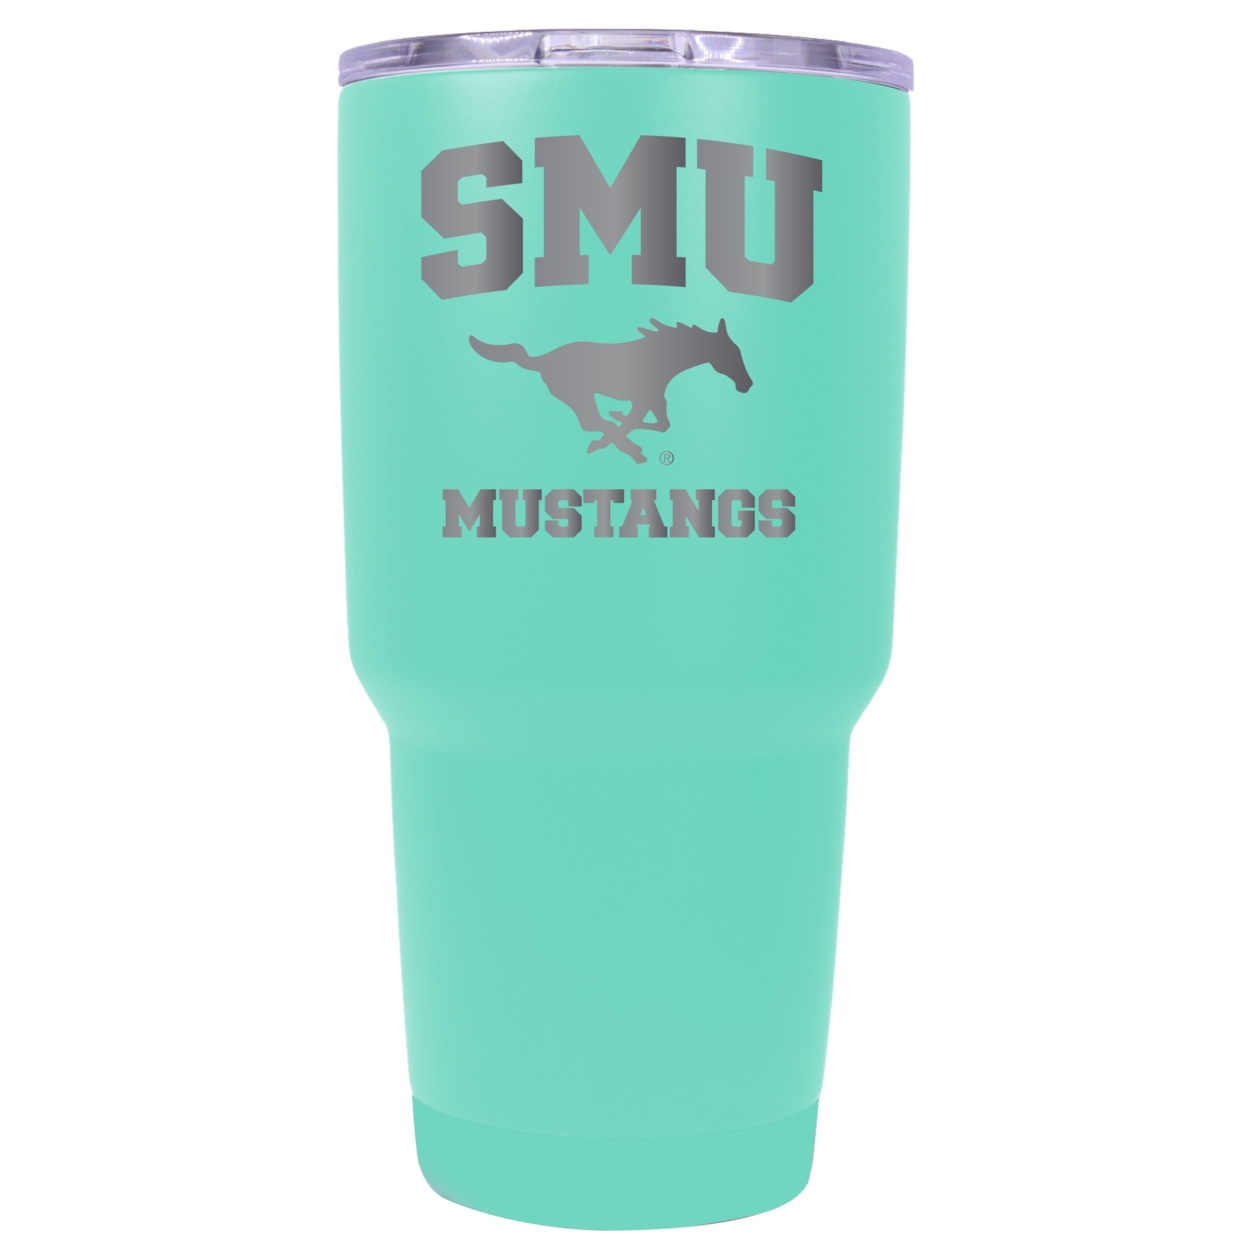 Southern Methodist University 24 Oz Laser Engraved Stainless Steel Insulated Tumbler - Choose Your Color. - Seafoam